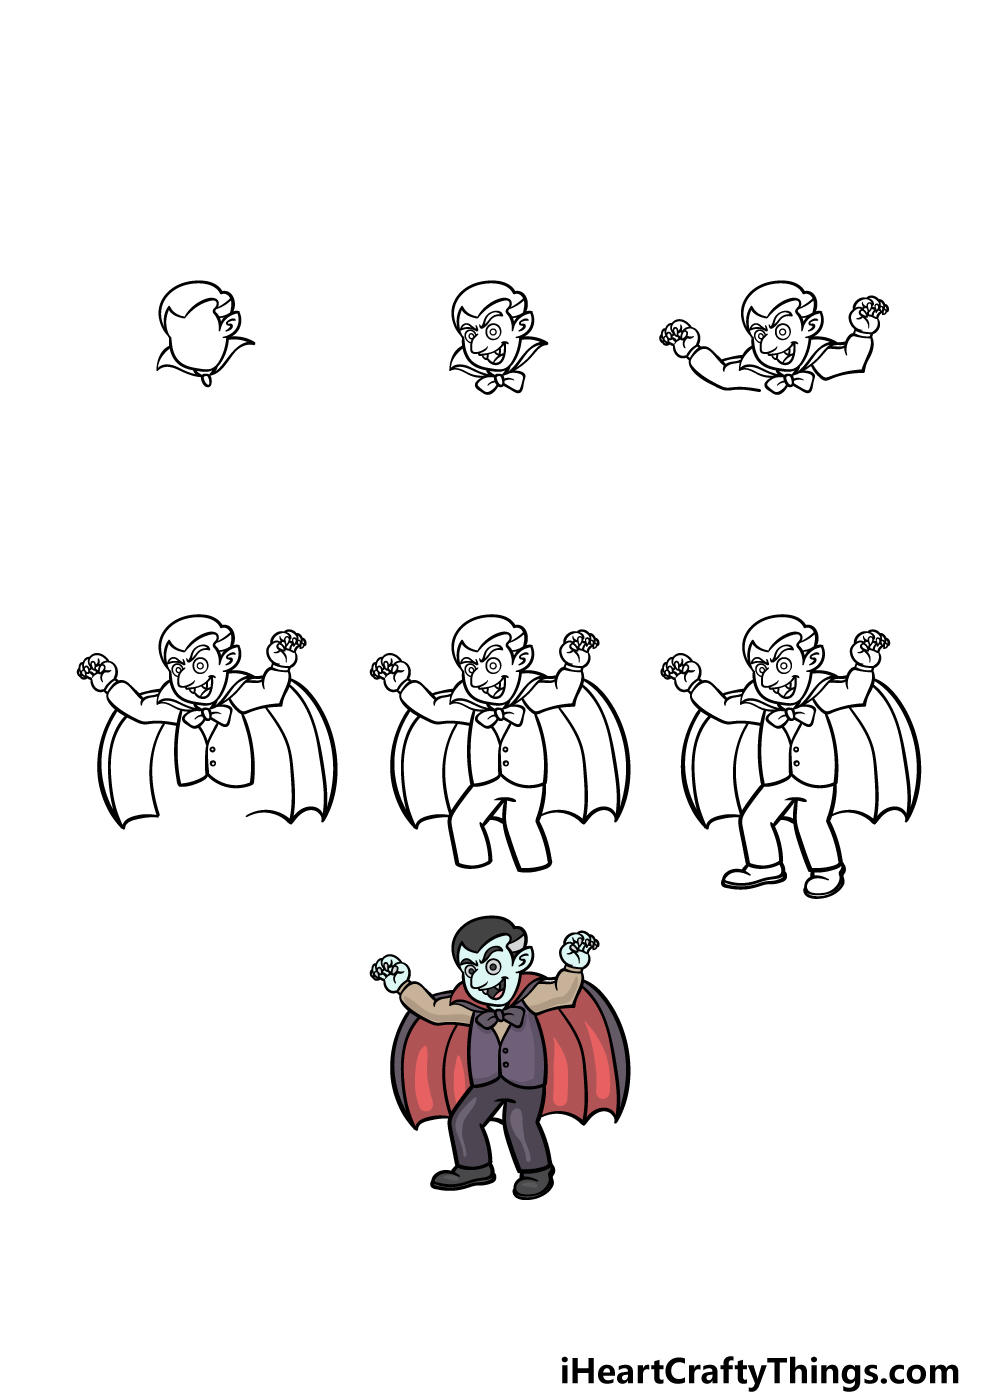 how to draw a cartoon vampire in 7 steps